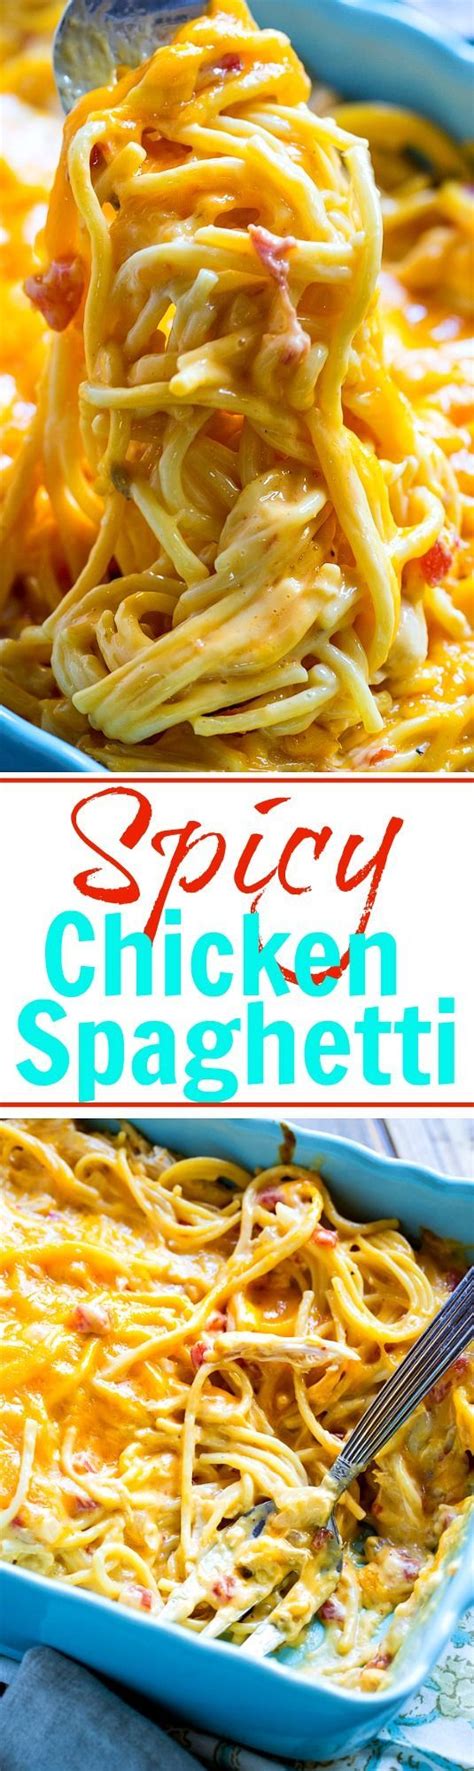 Spicy Chicken Spaghetti And Red Gold S New Sriracha Products Recipe